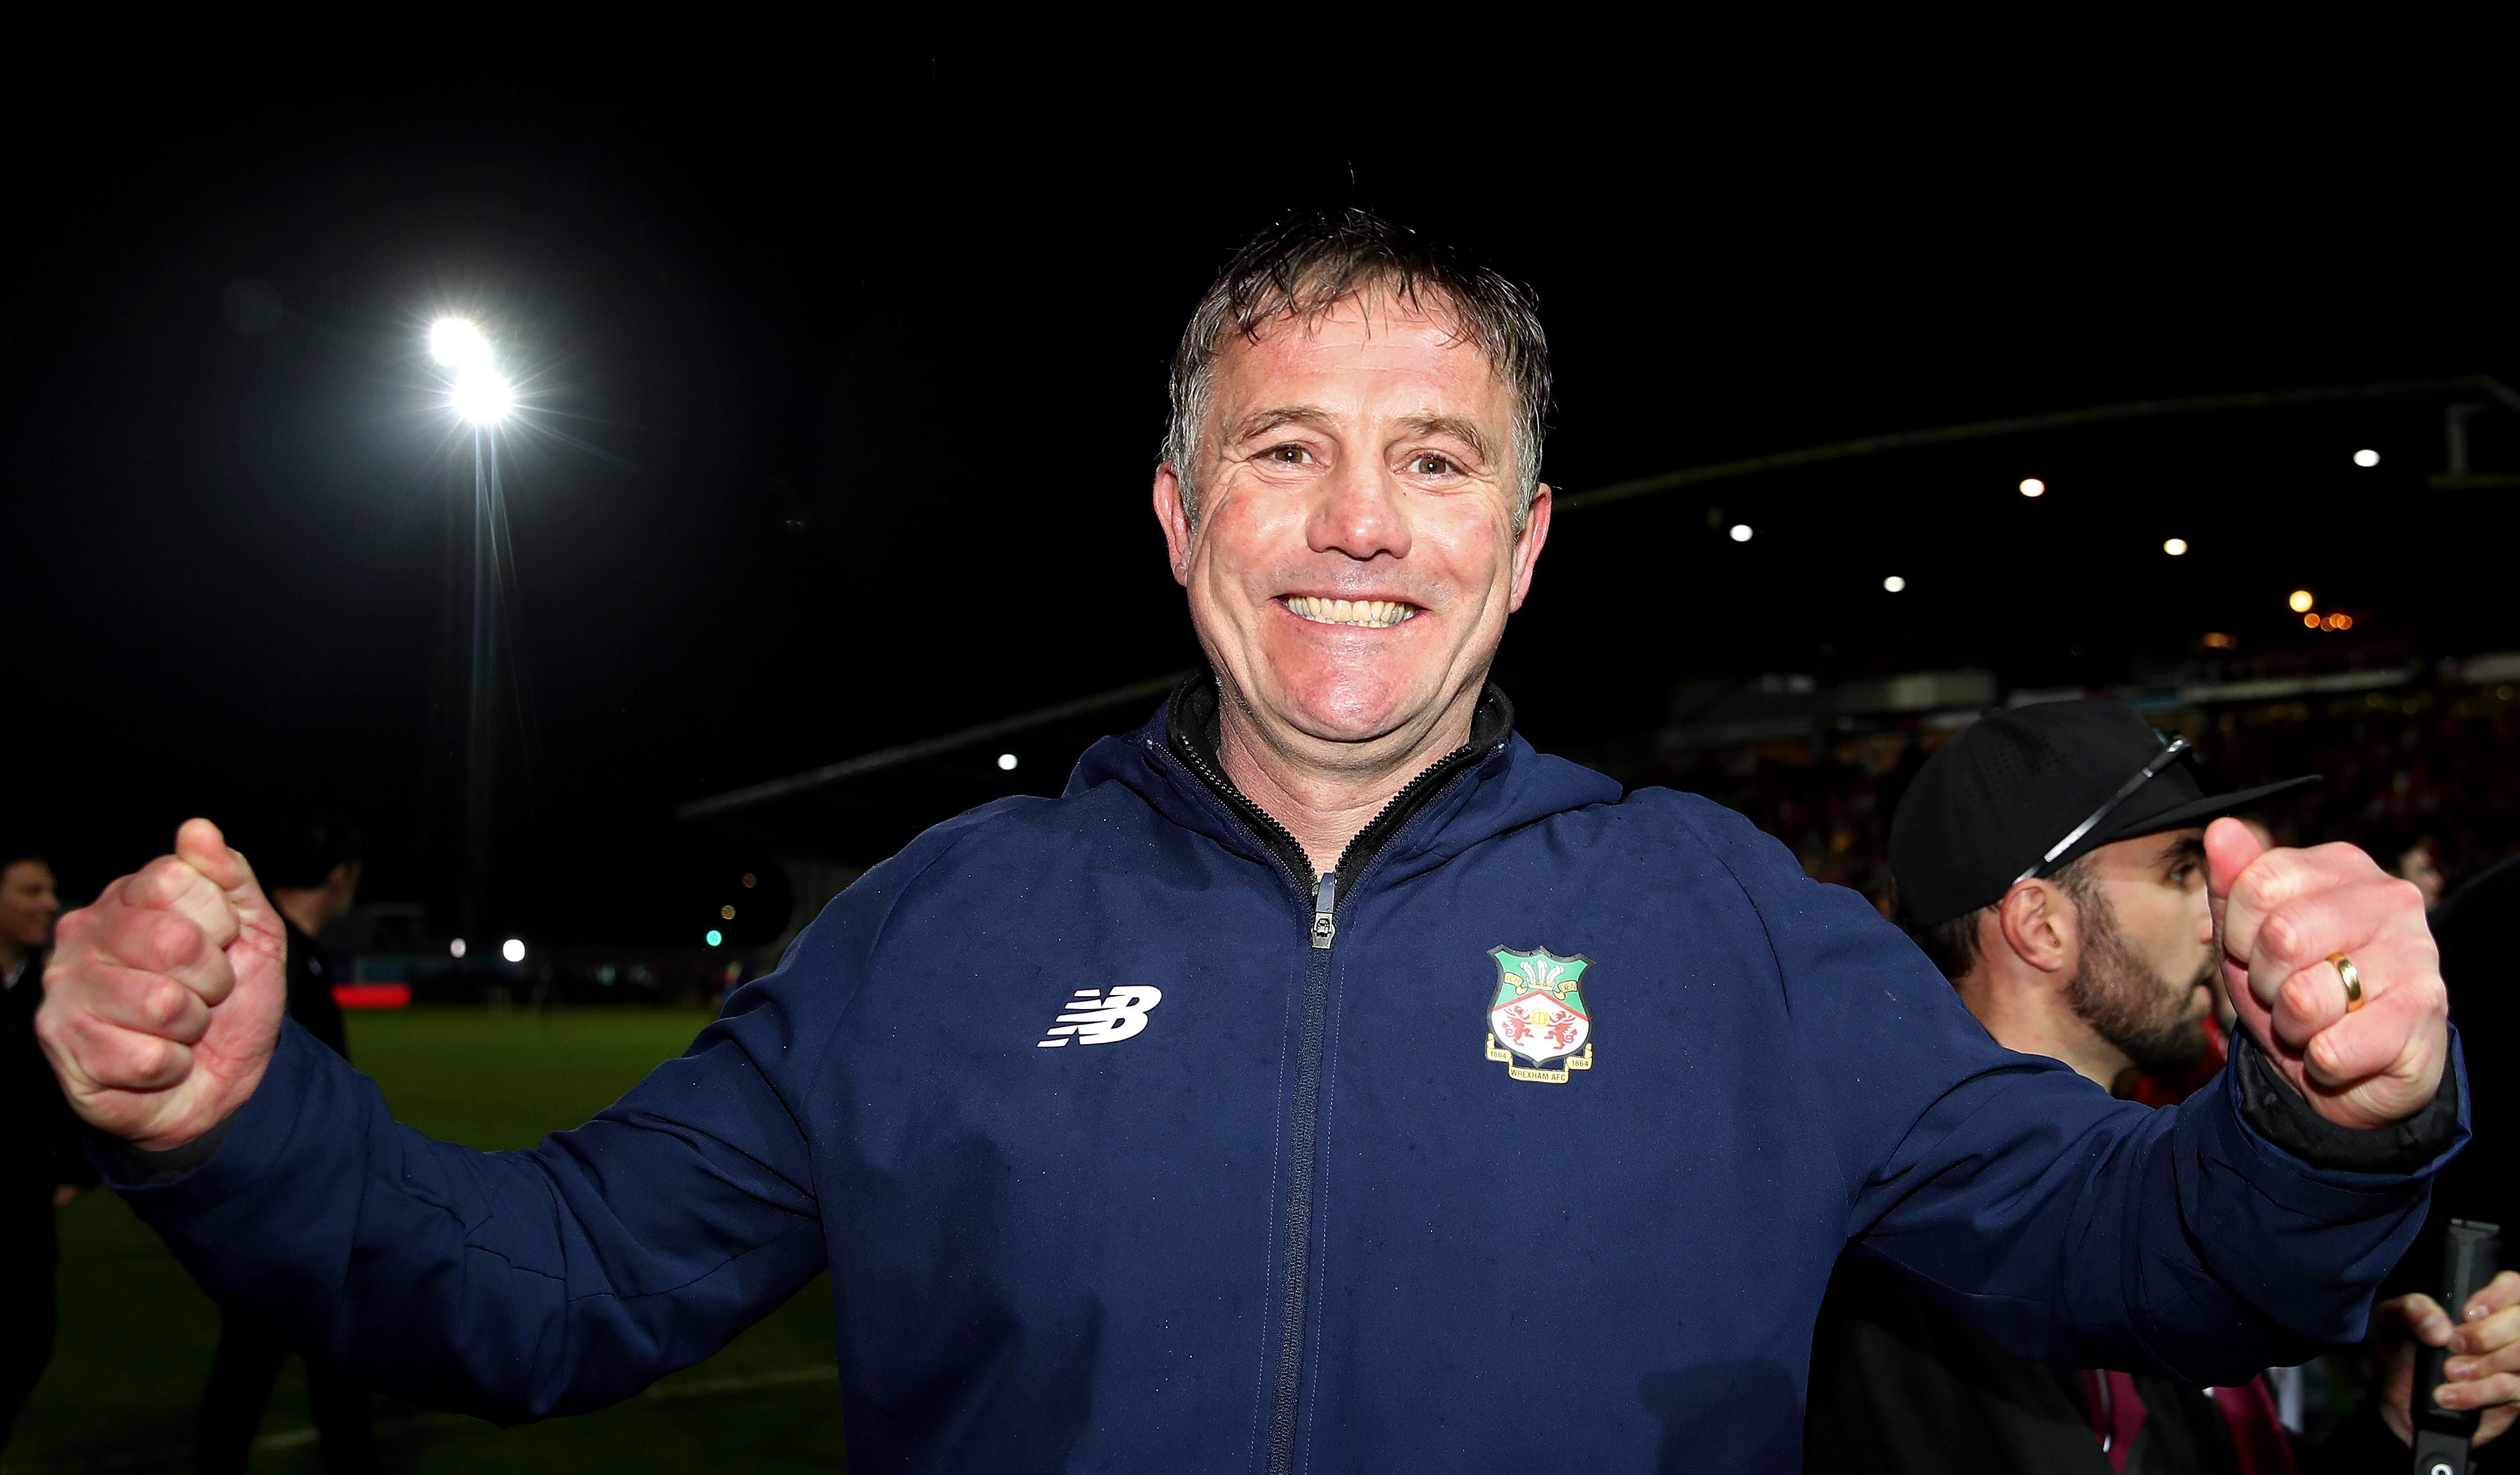 Phil Parkinson, manager, celebrates after Wrexham are promoted to the English Football League